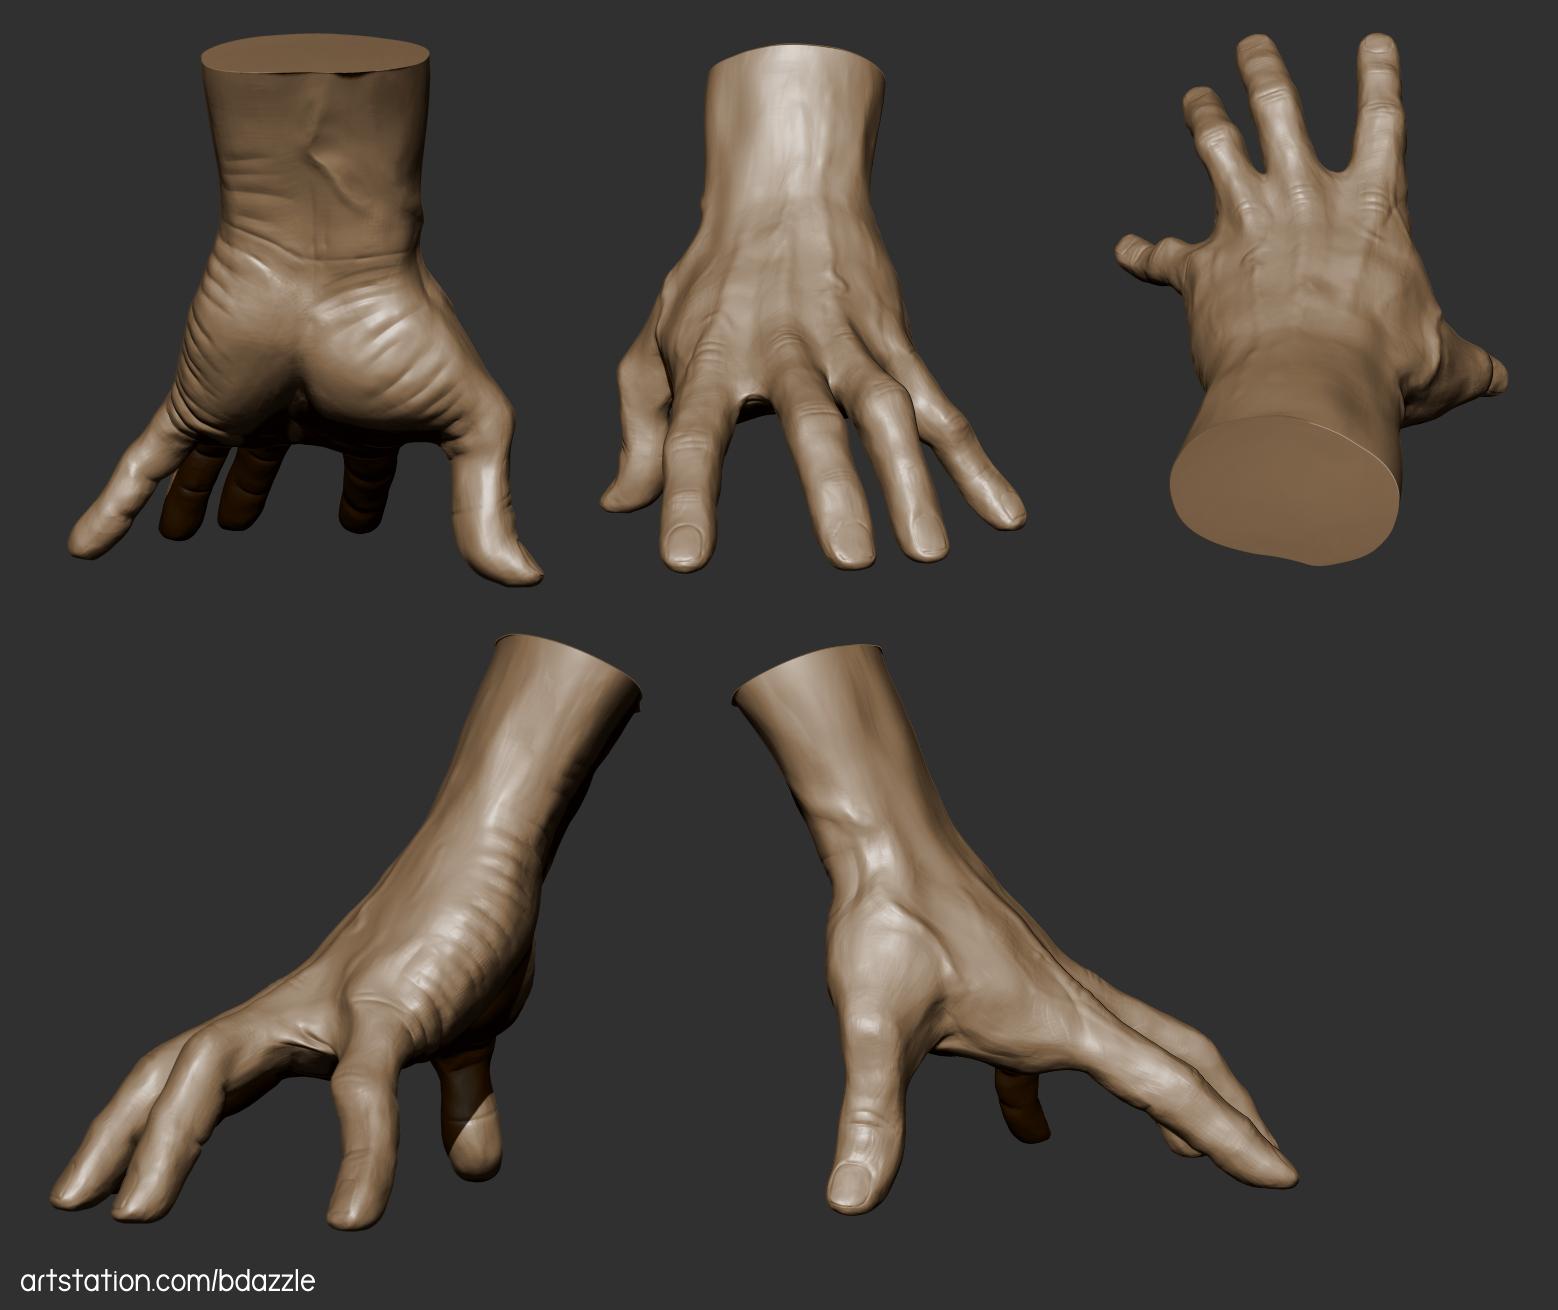 3D sculpted hand with fingers pressing down from multiple points of view by Britney Luong